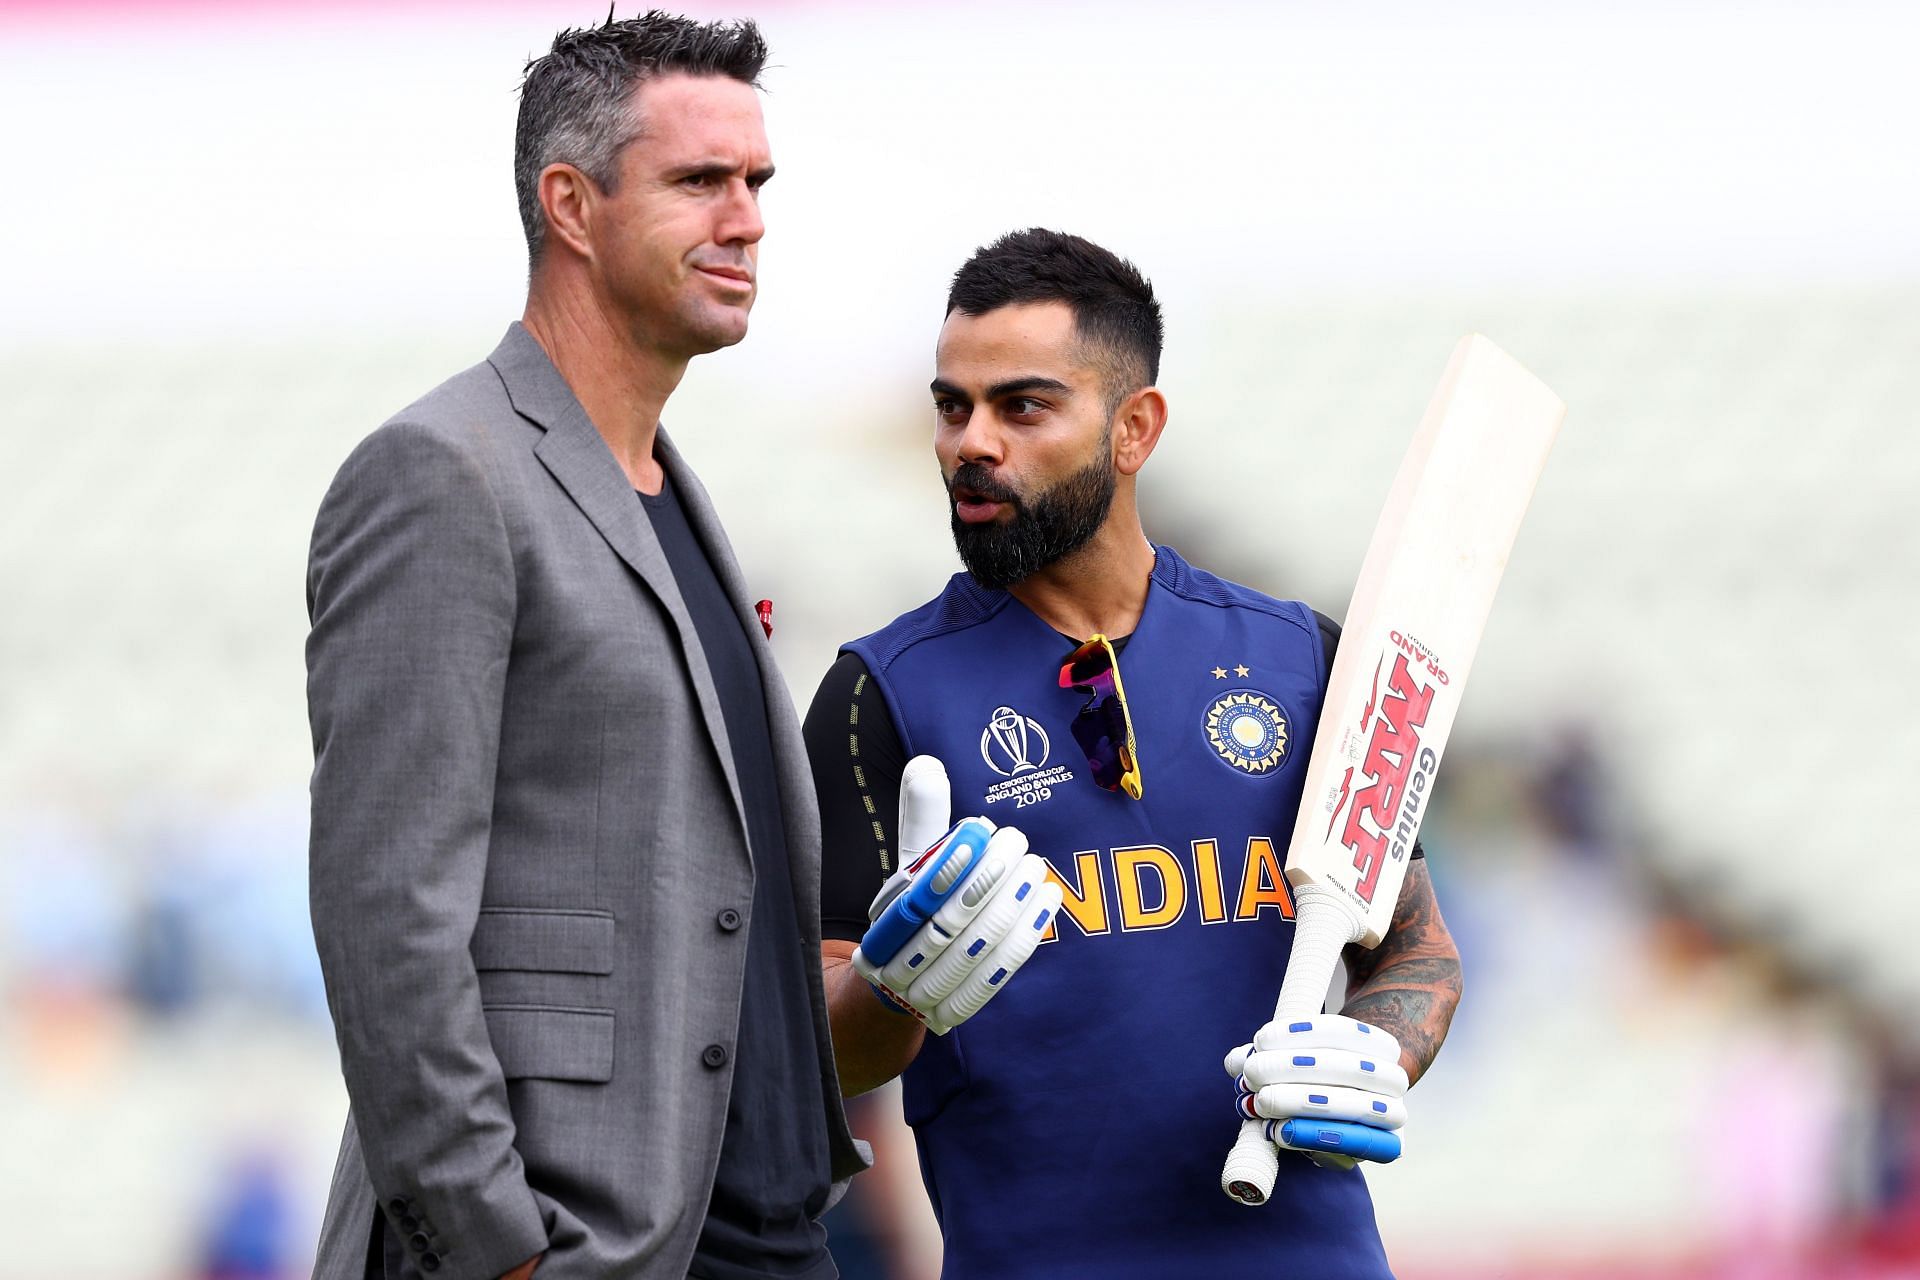 Kevin Pietersen (L) and Kohli had a chat during the 2019 Cricket World Cup (Image: Getty)